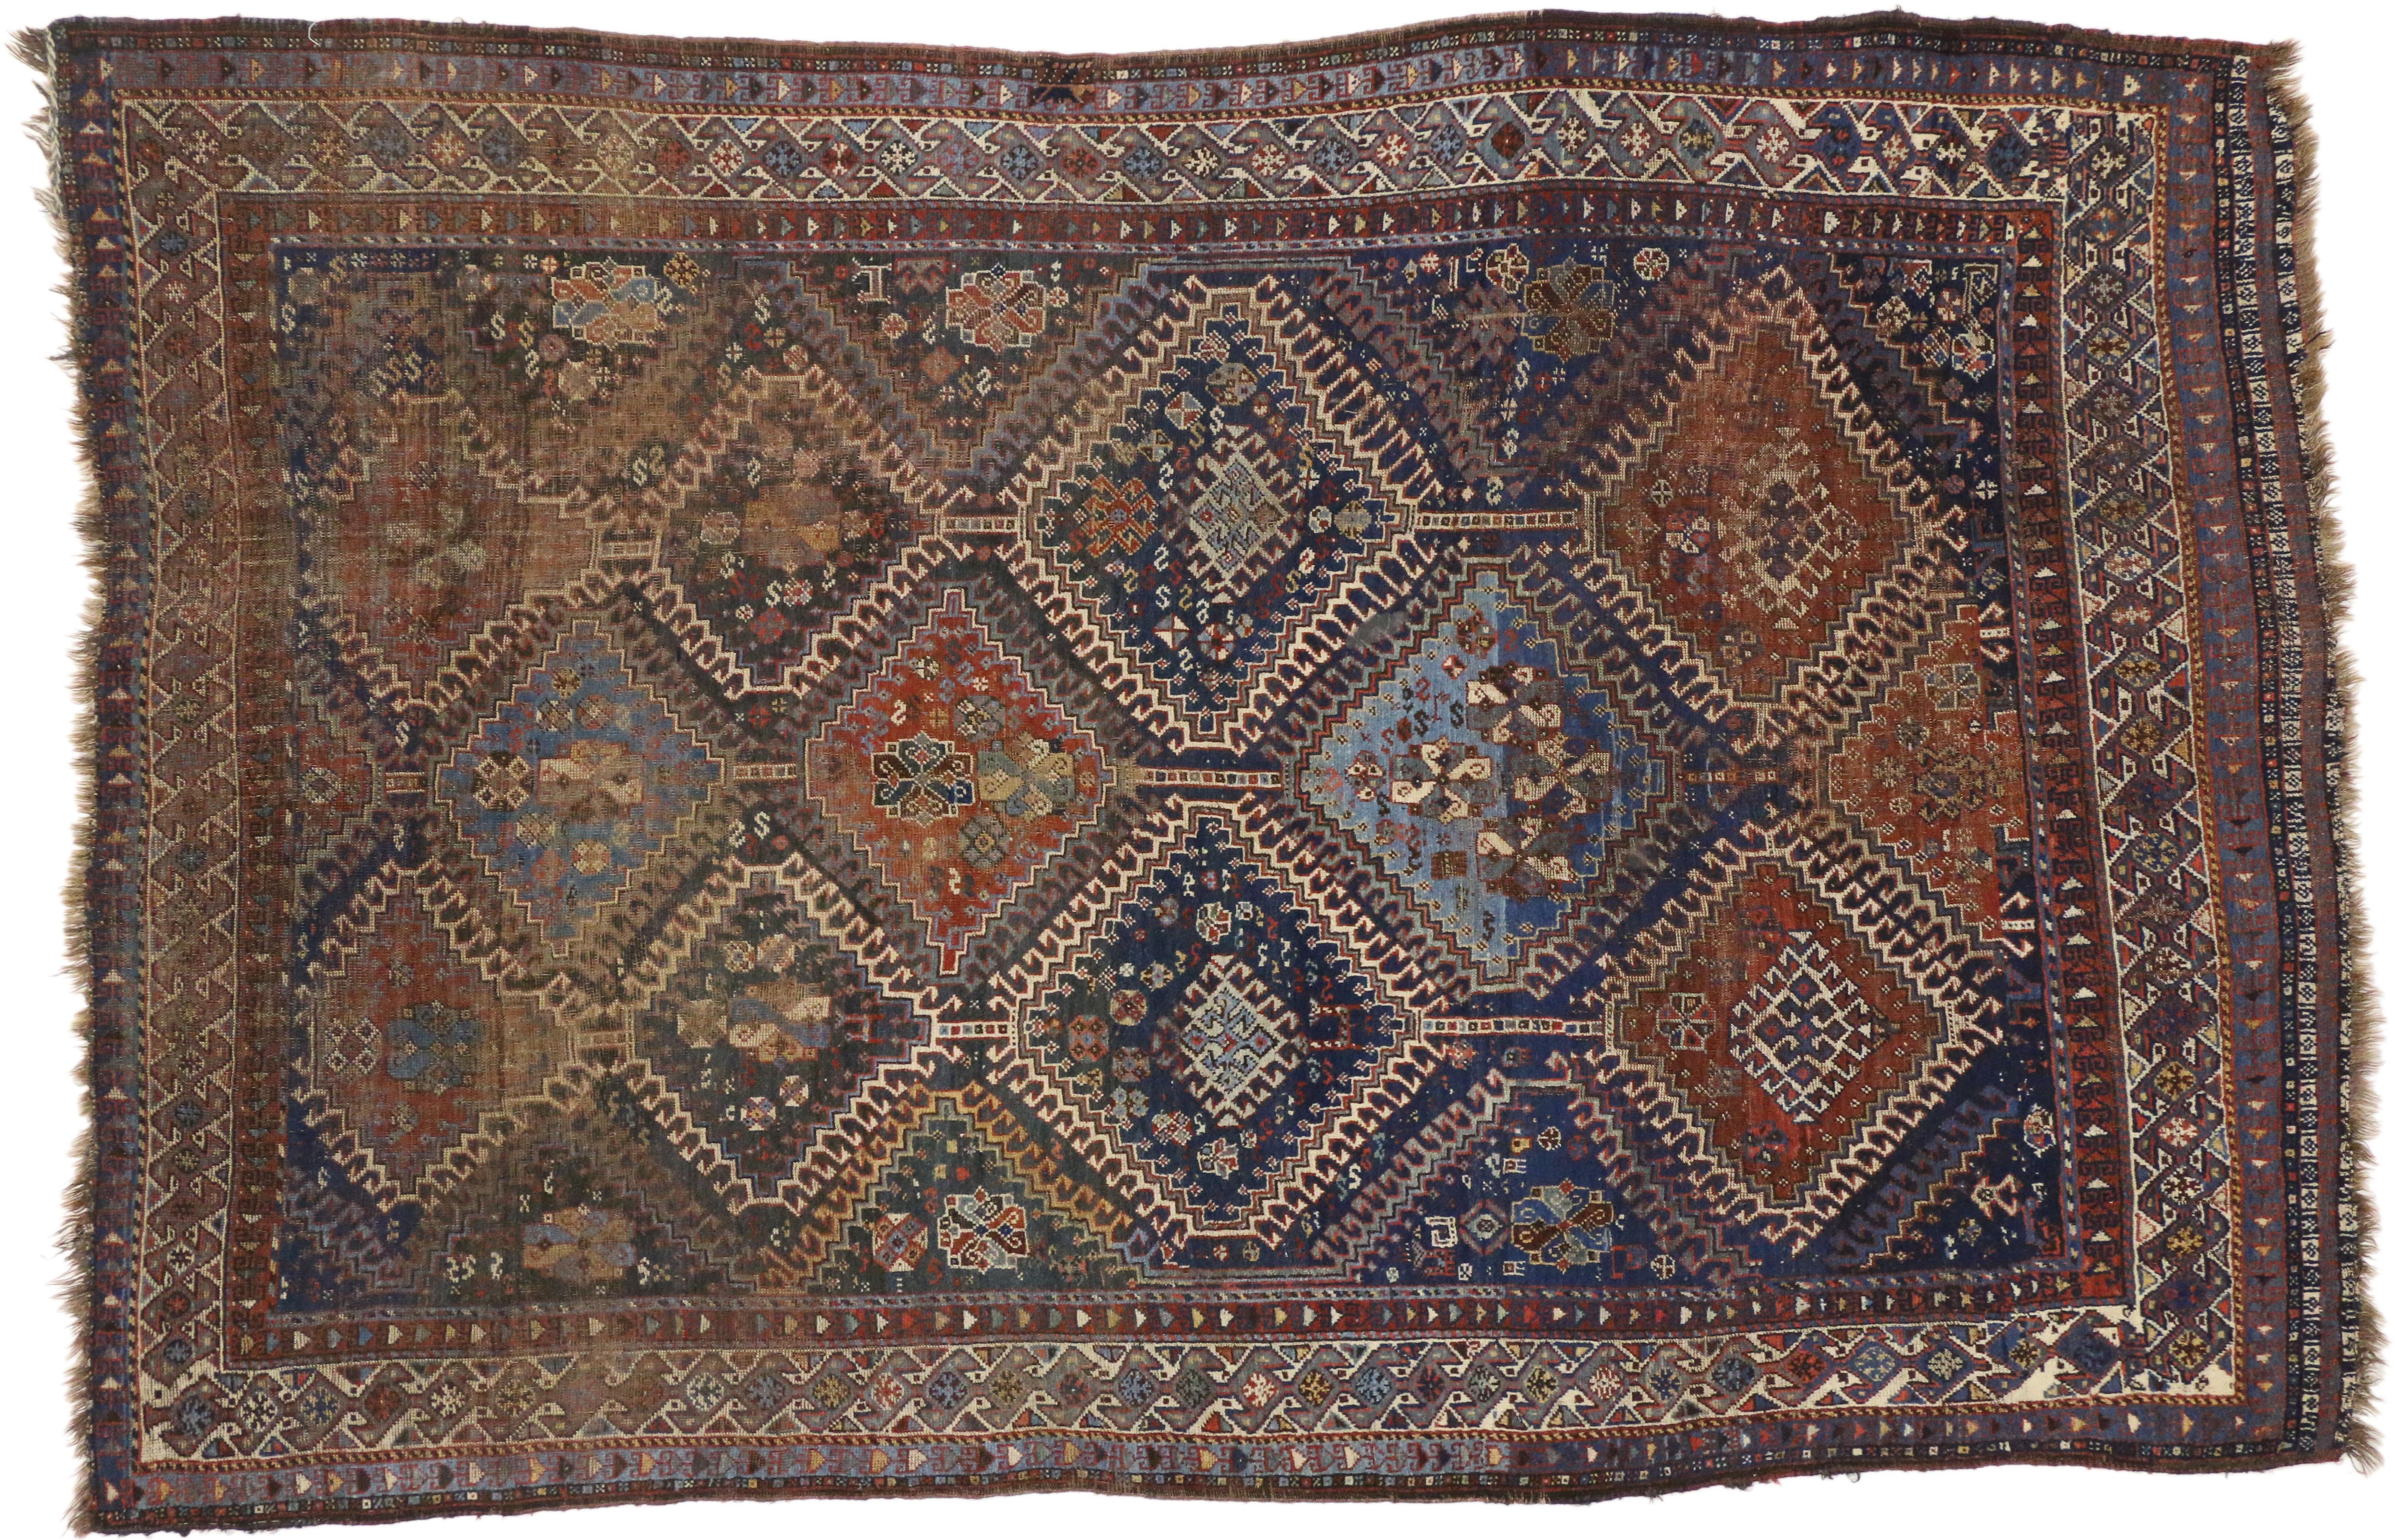 20th Century Antique Persian Shiraz Rug with Modern Tribal Style